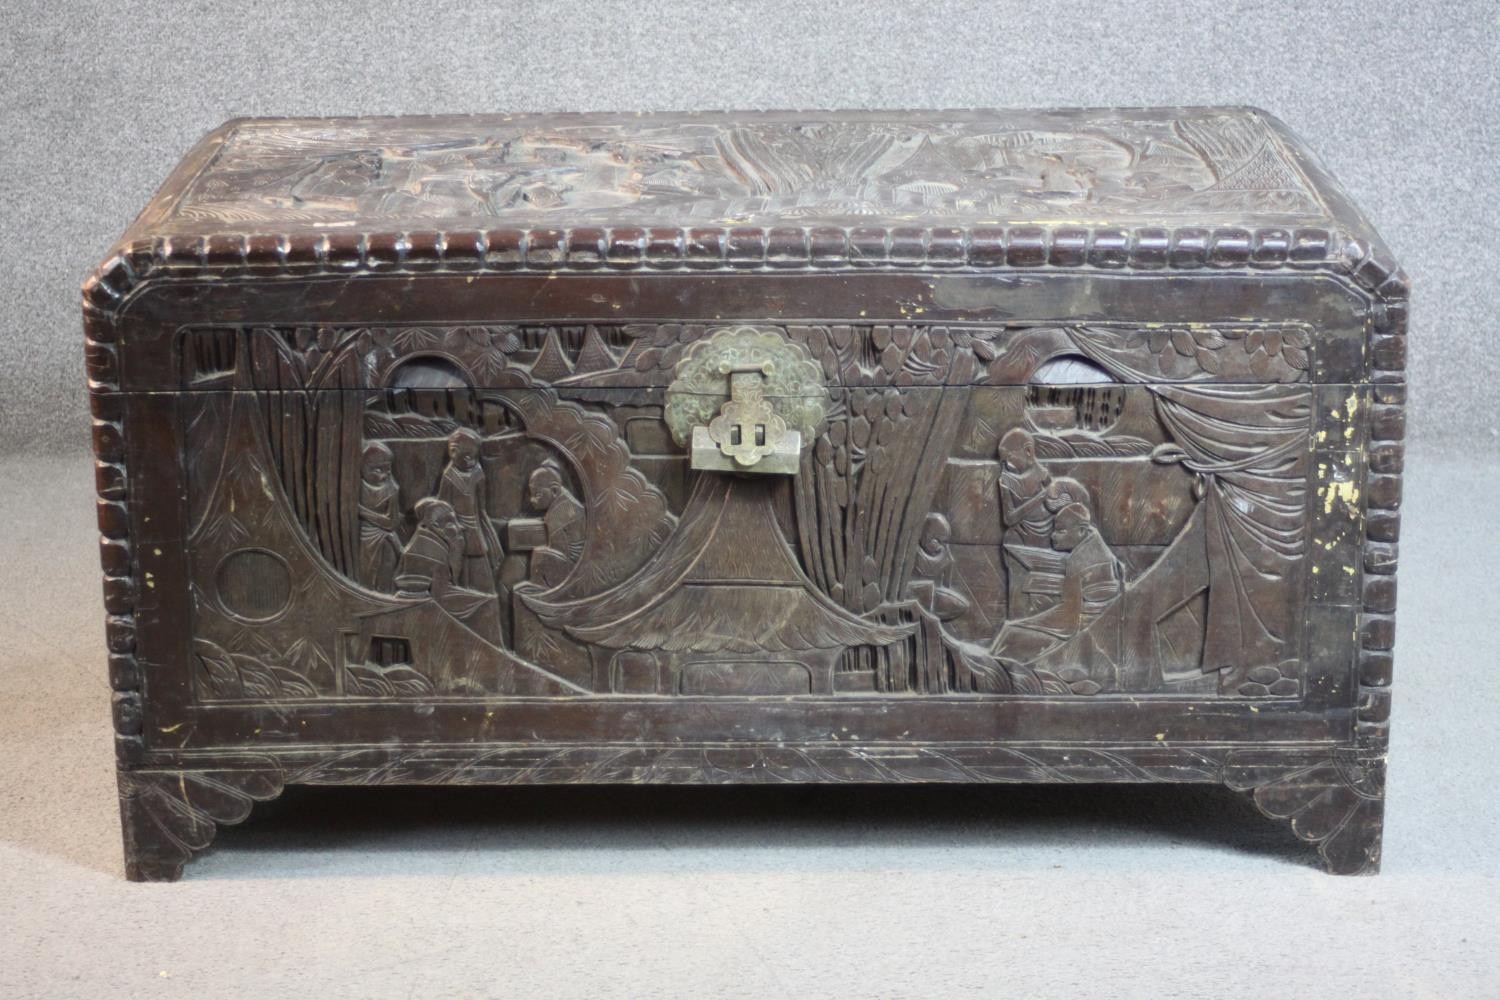 An early 20th century Chinese camphorwood chest, the exterior carved allover with figures amongst